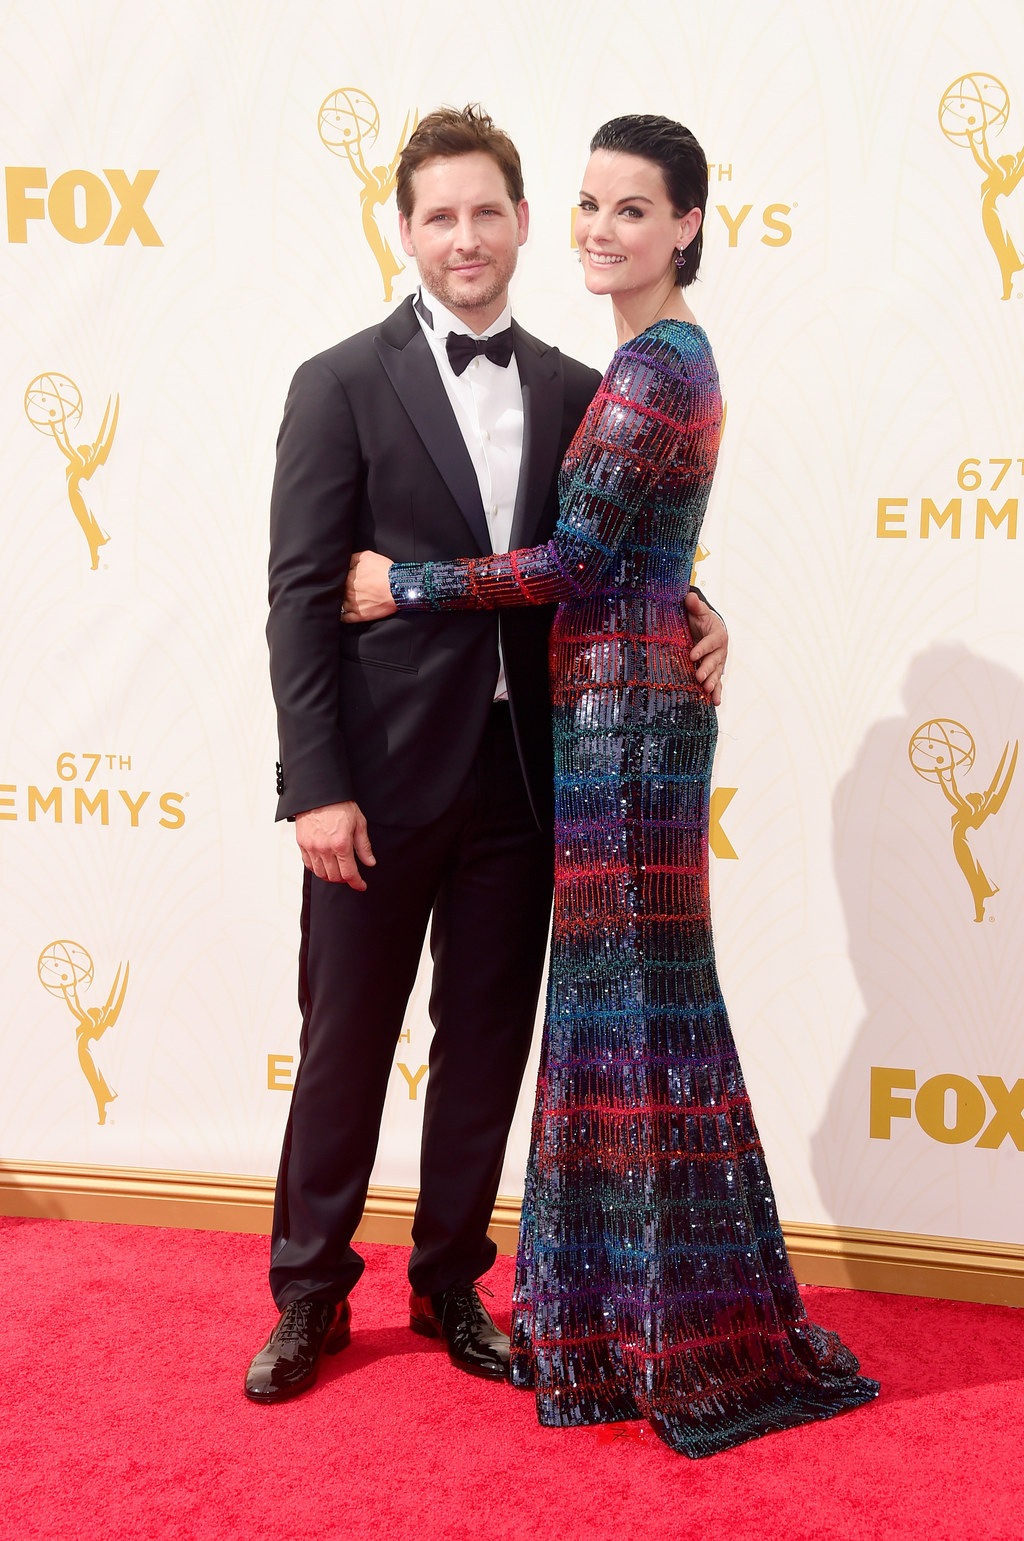 19 Adorably Cute Couples On The Emmys Red Carpet